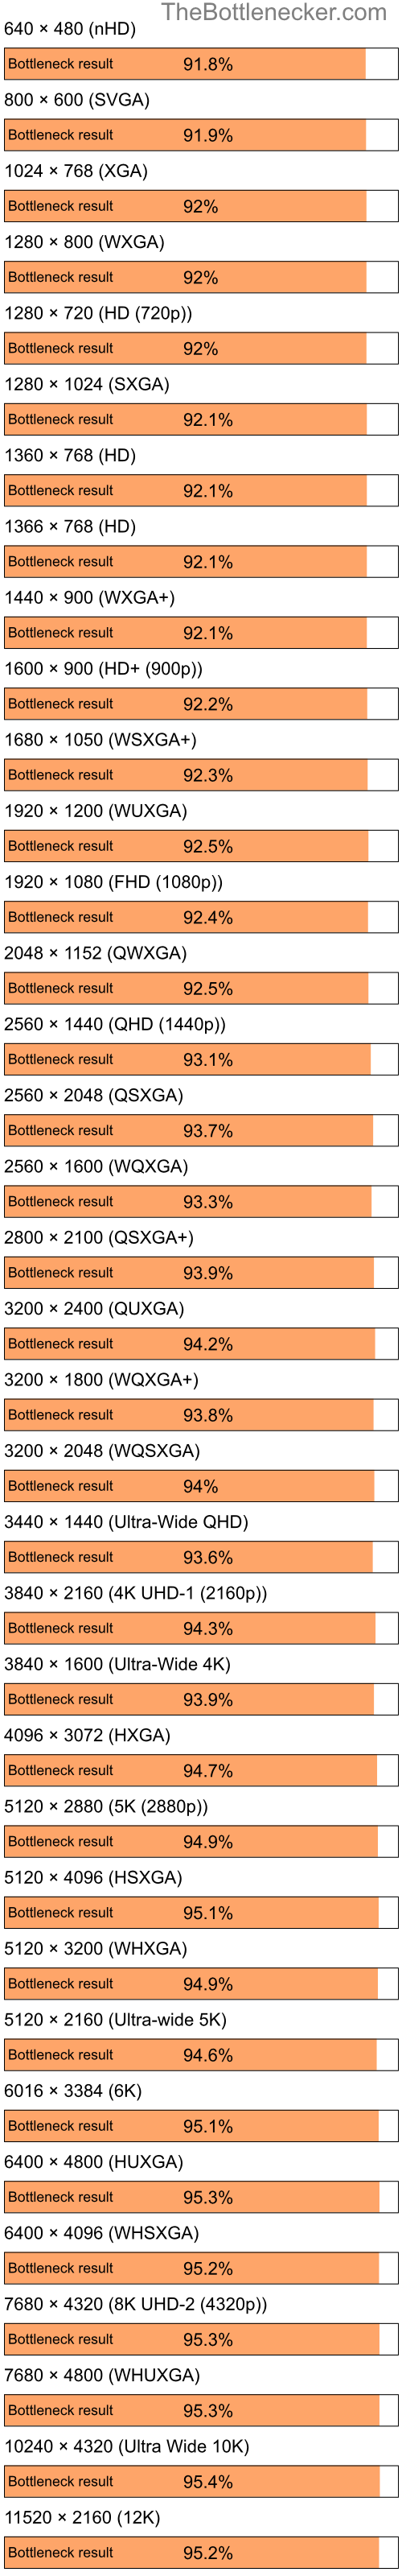 Bottleneck results by resolution for Intel Atom N270 and AMD Radeon 9250 in7 Days to Die